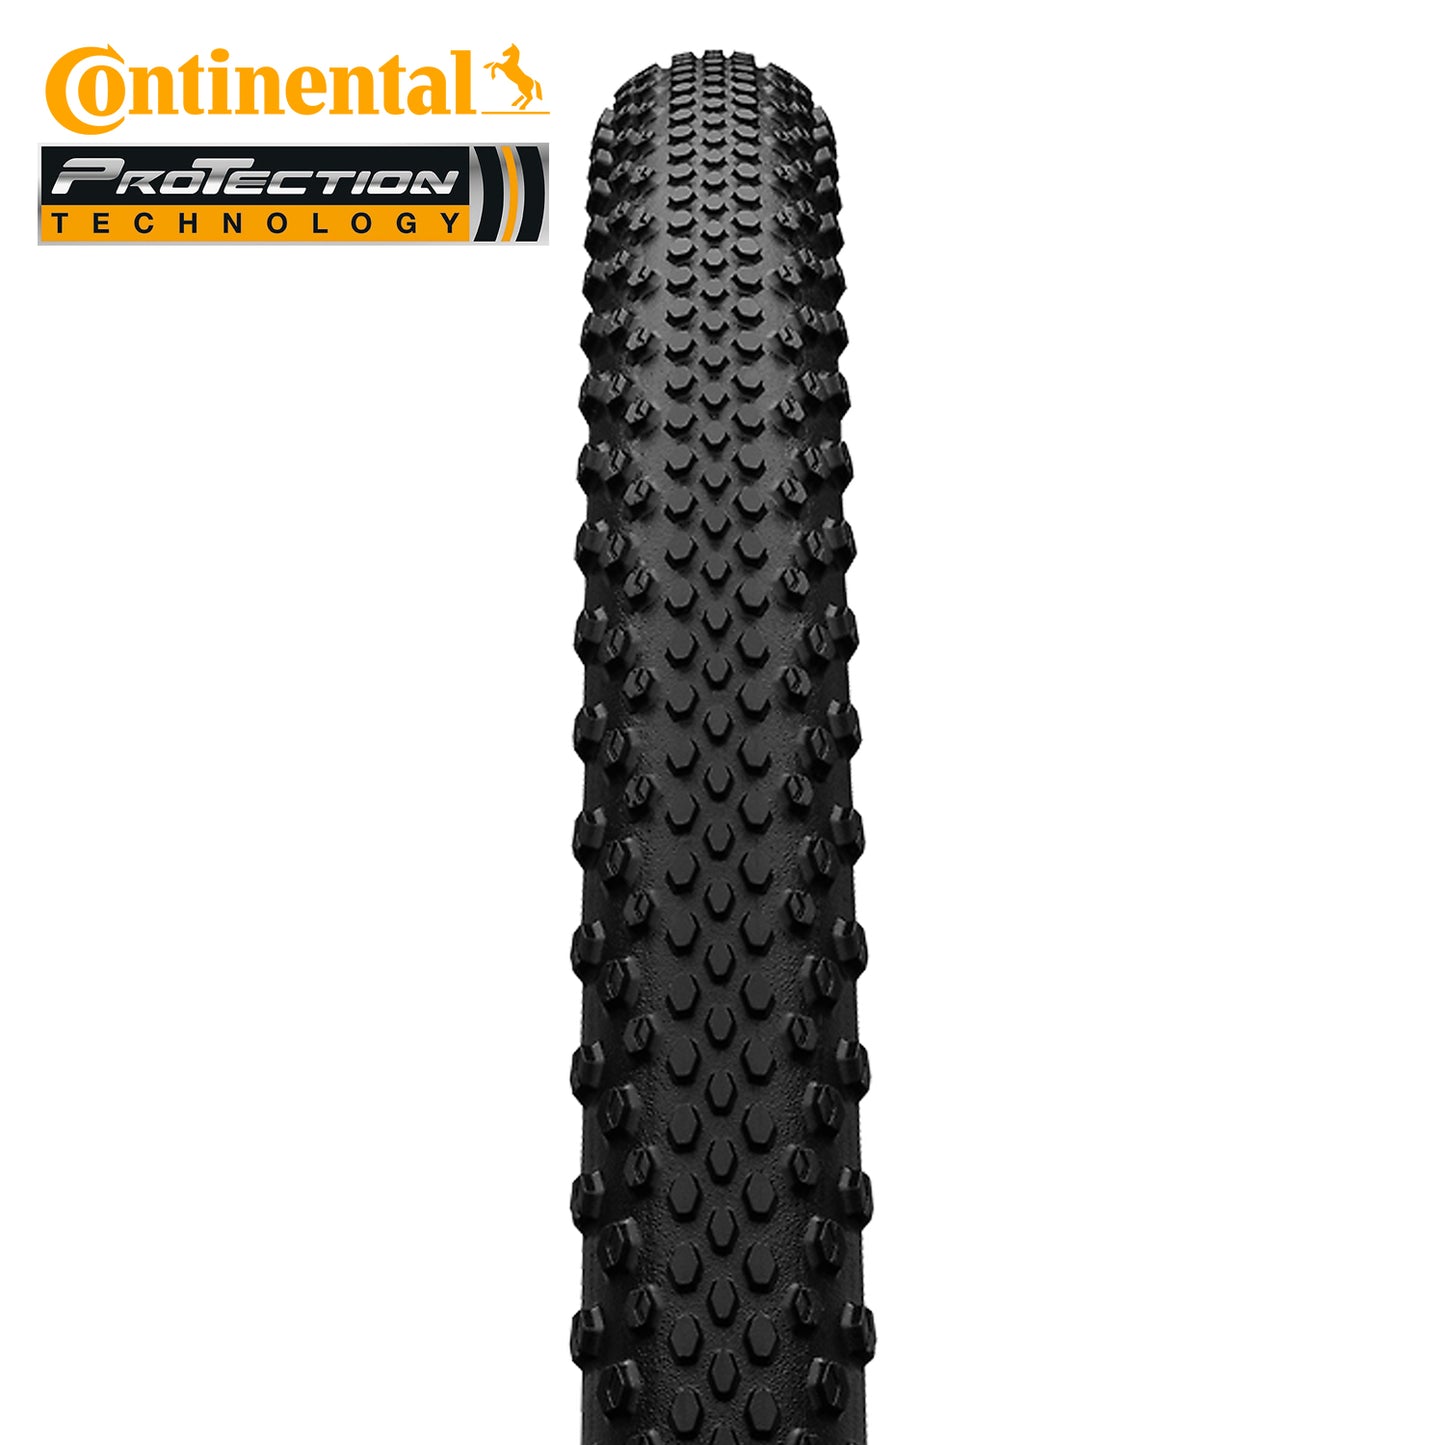 Continental Terra Trail Gravel Tire Tubeless Ready ProTection 700c - Black